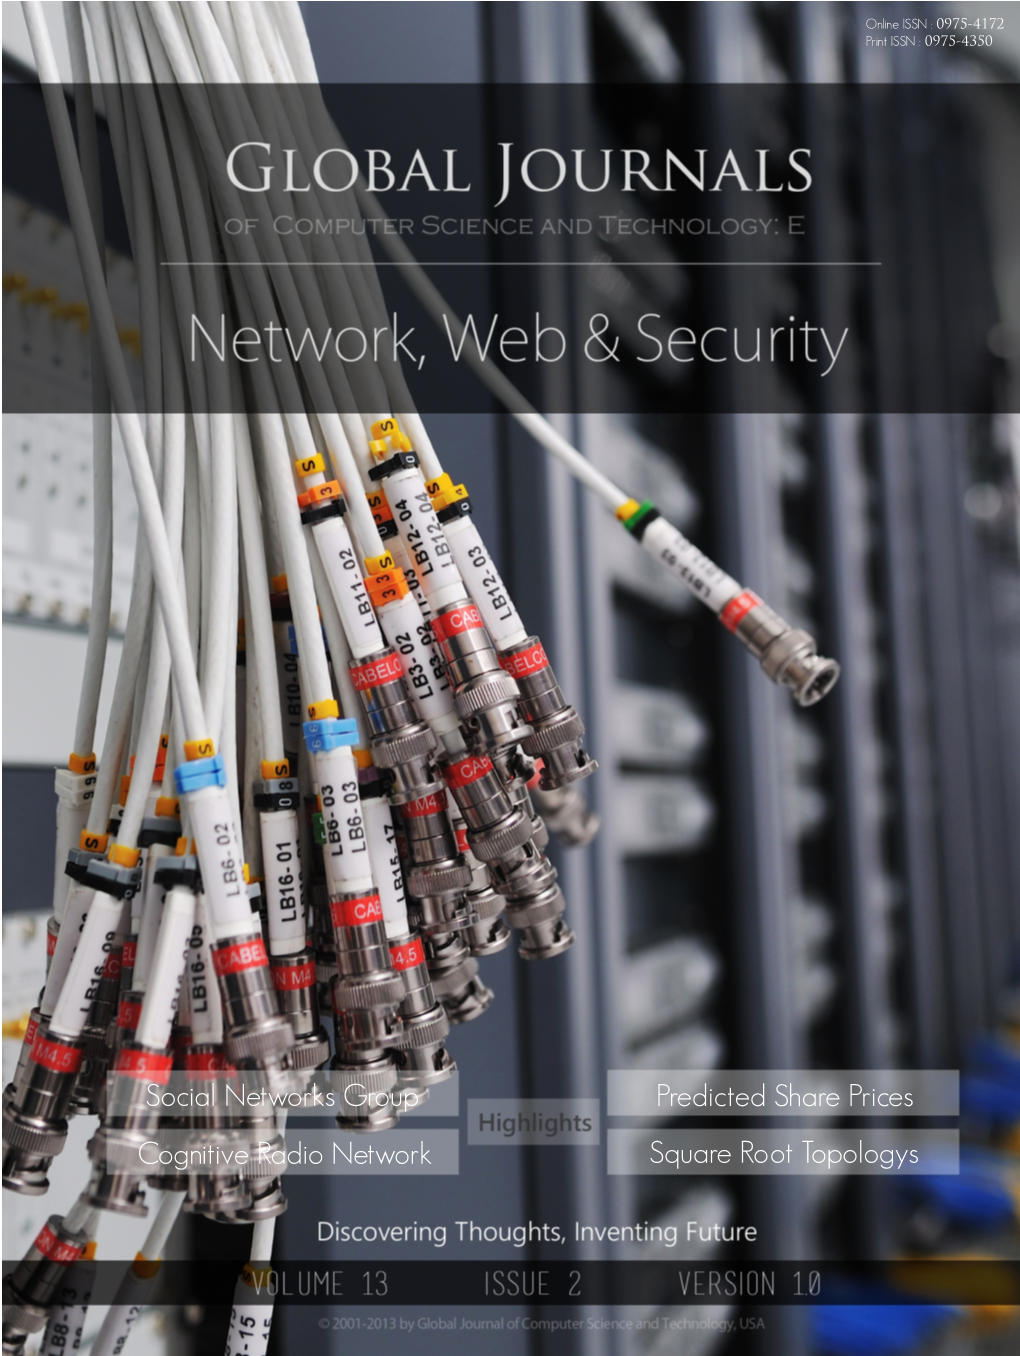 Global Journal of Computer Science and Technology: E Network, Web & Security